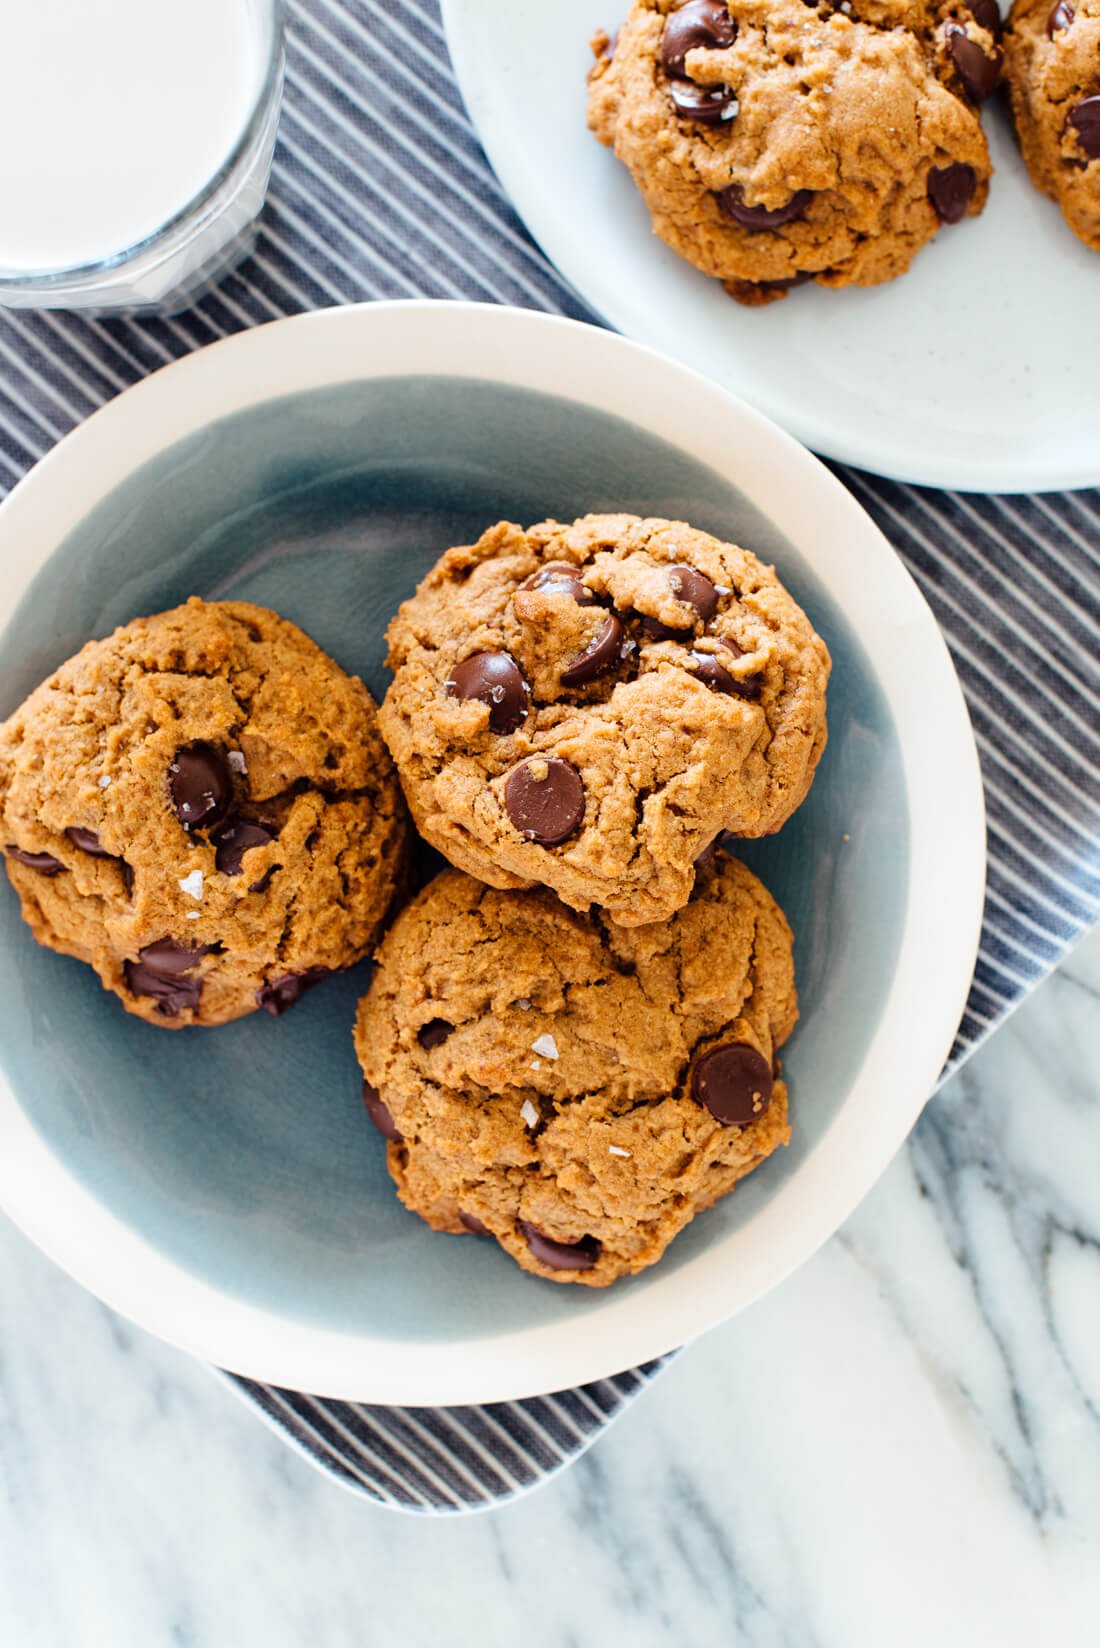 Amazing Chocolate Chip Cookies Recipe - Cookie and Kate